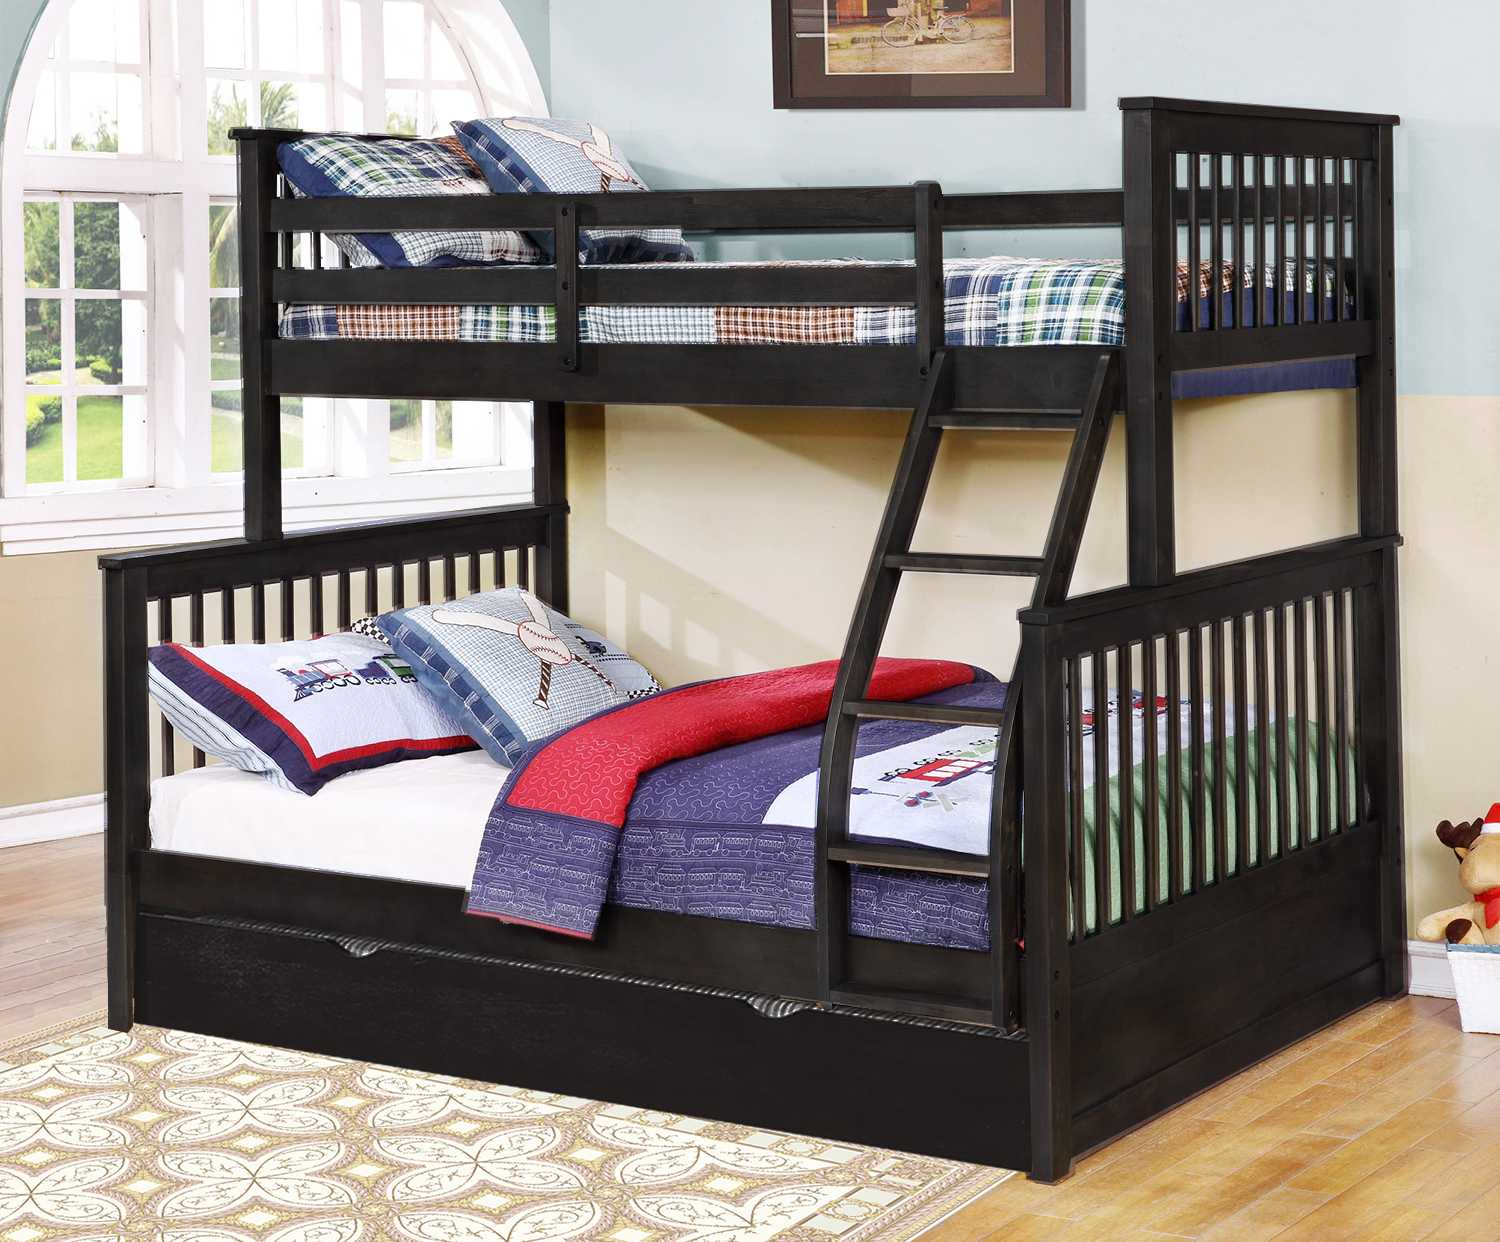 80.5" X 41.5-57.5" X 70.25" Charcoal Manufactured Wood and Solid Wood Twin or Full Bunk Bed with Matching Trundle